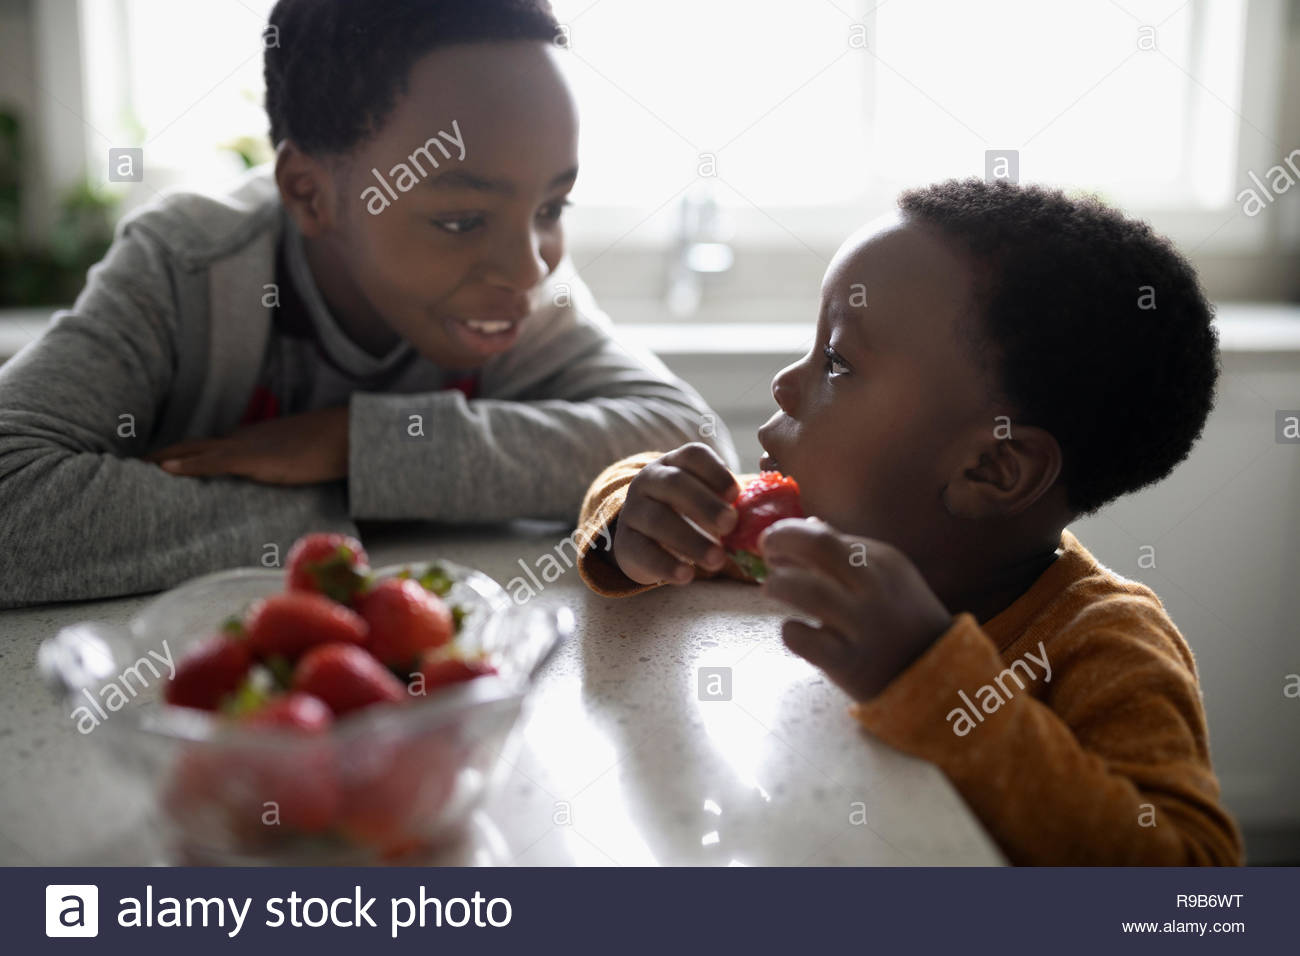 Brothers eating strawberries Stock Photo